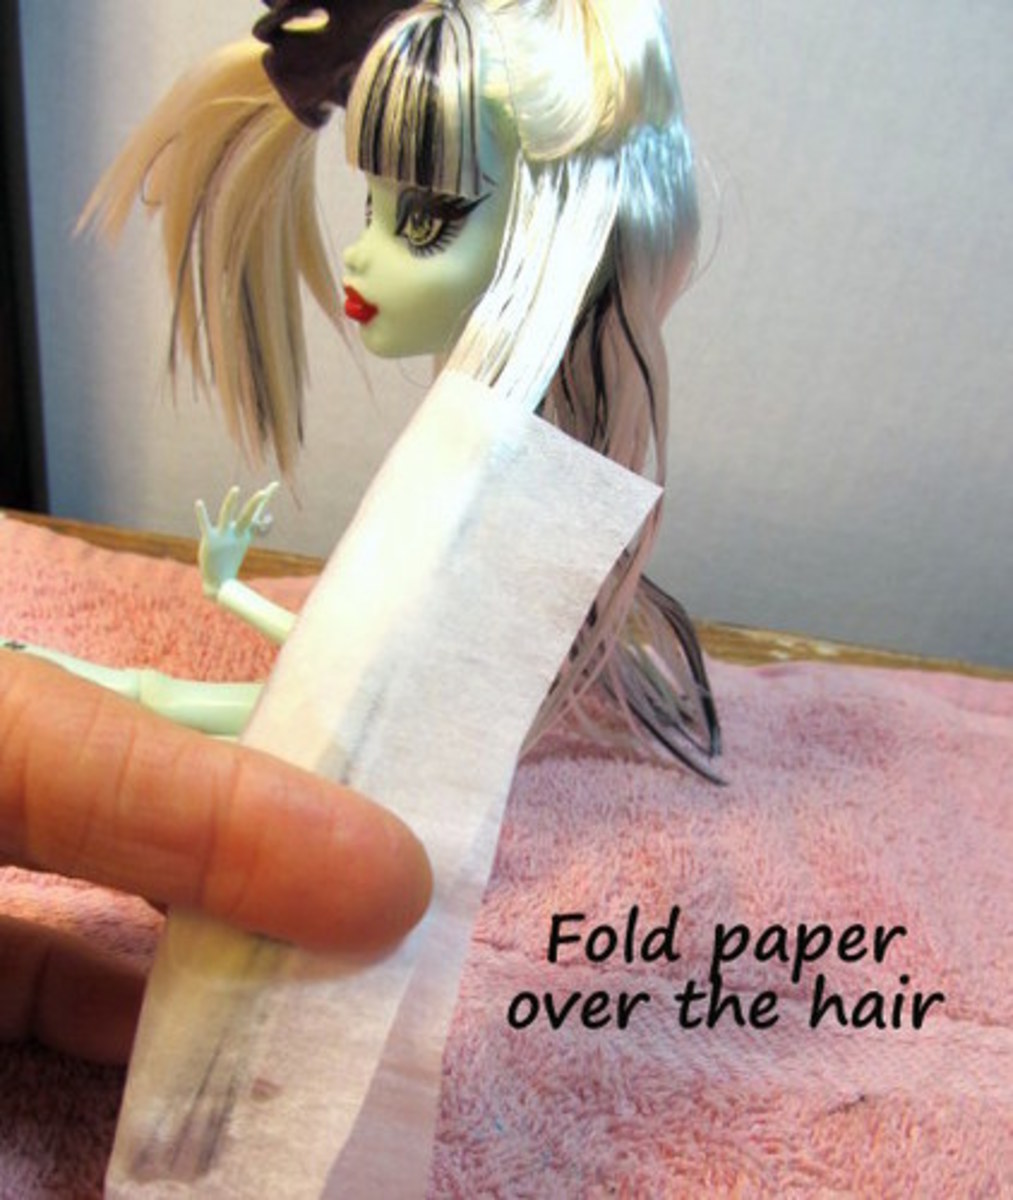 Fold the paper over the hair.